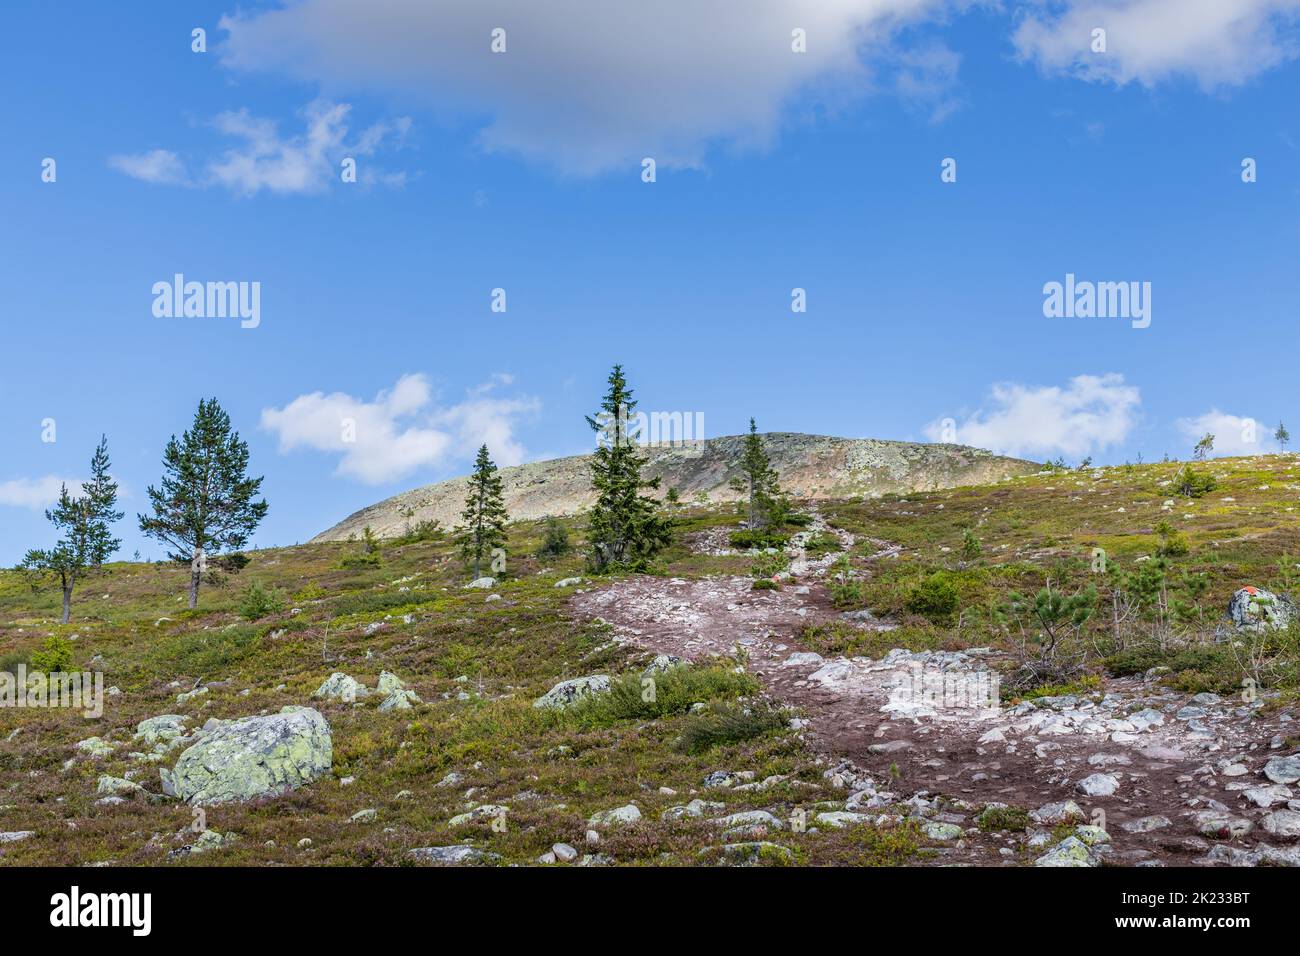 Idre, Sweden: hiking trail in the mountains Stock Photo